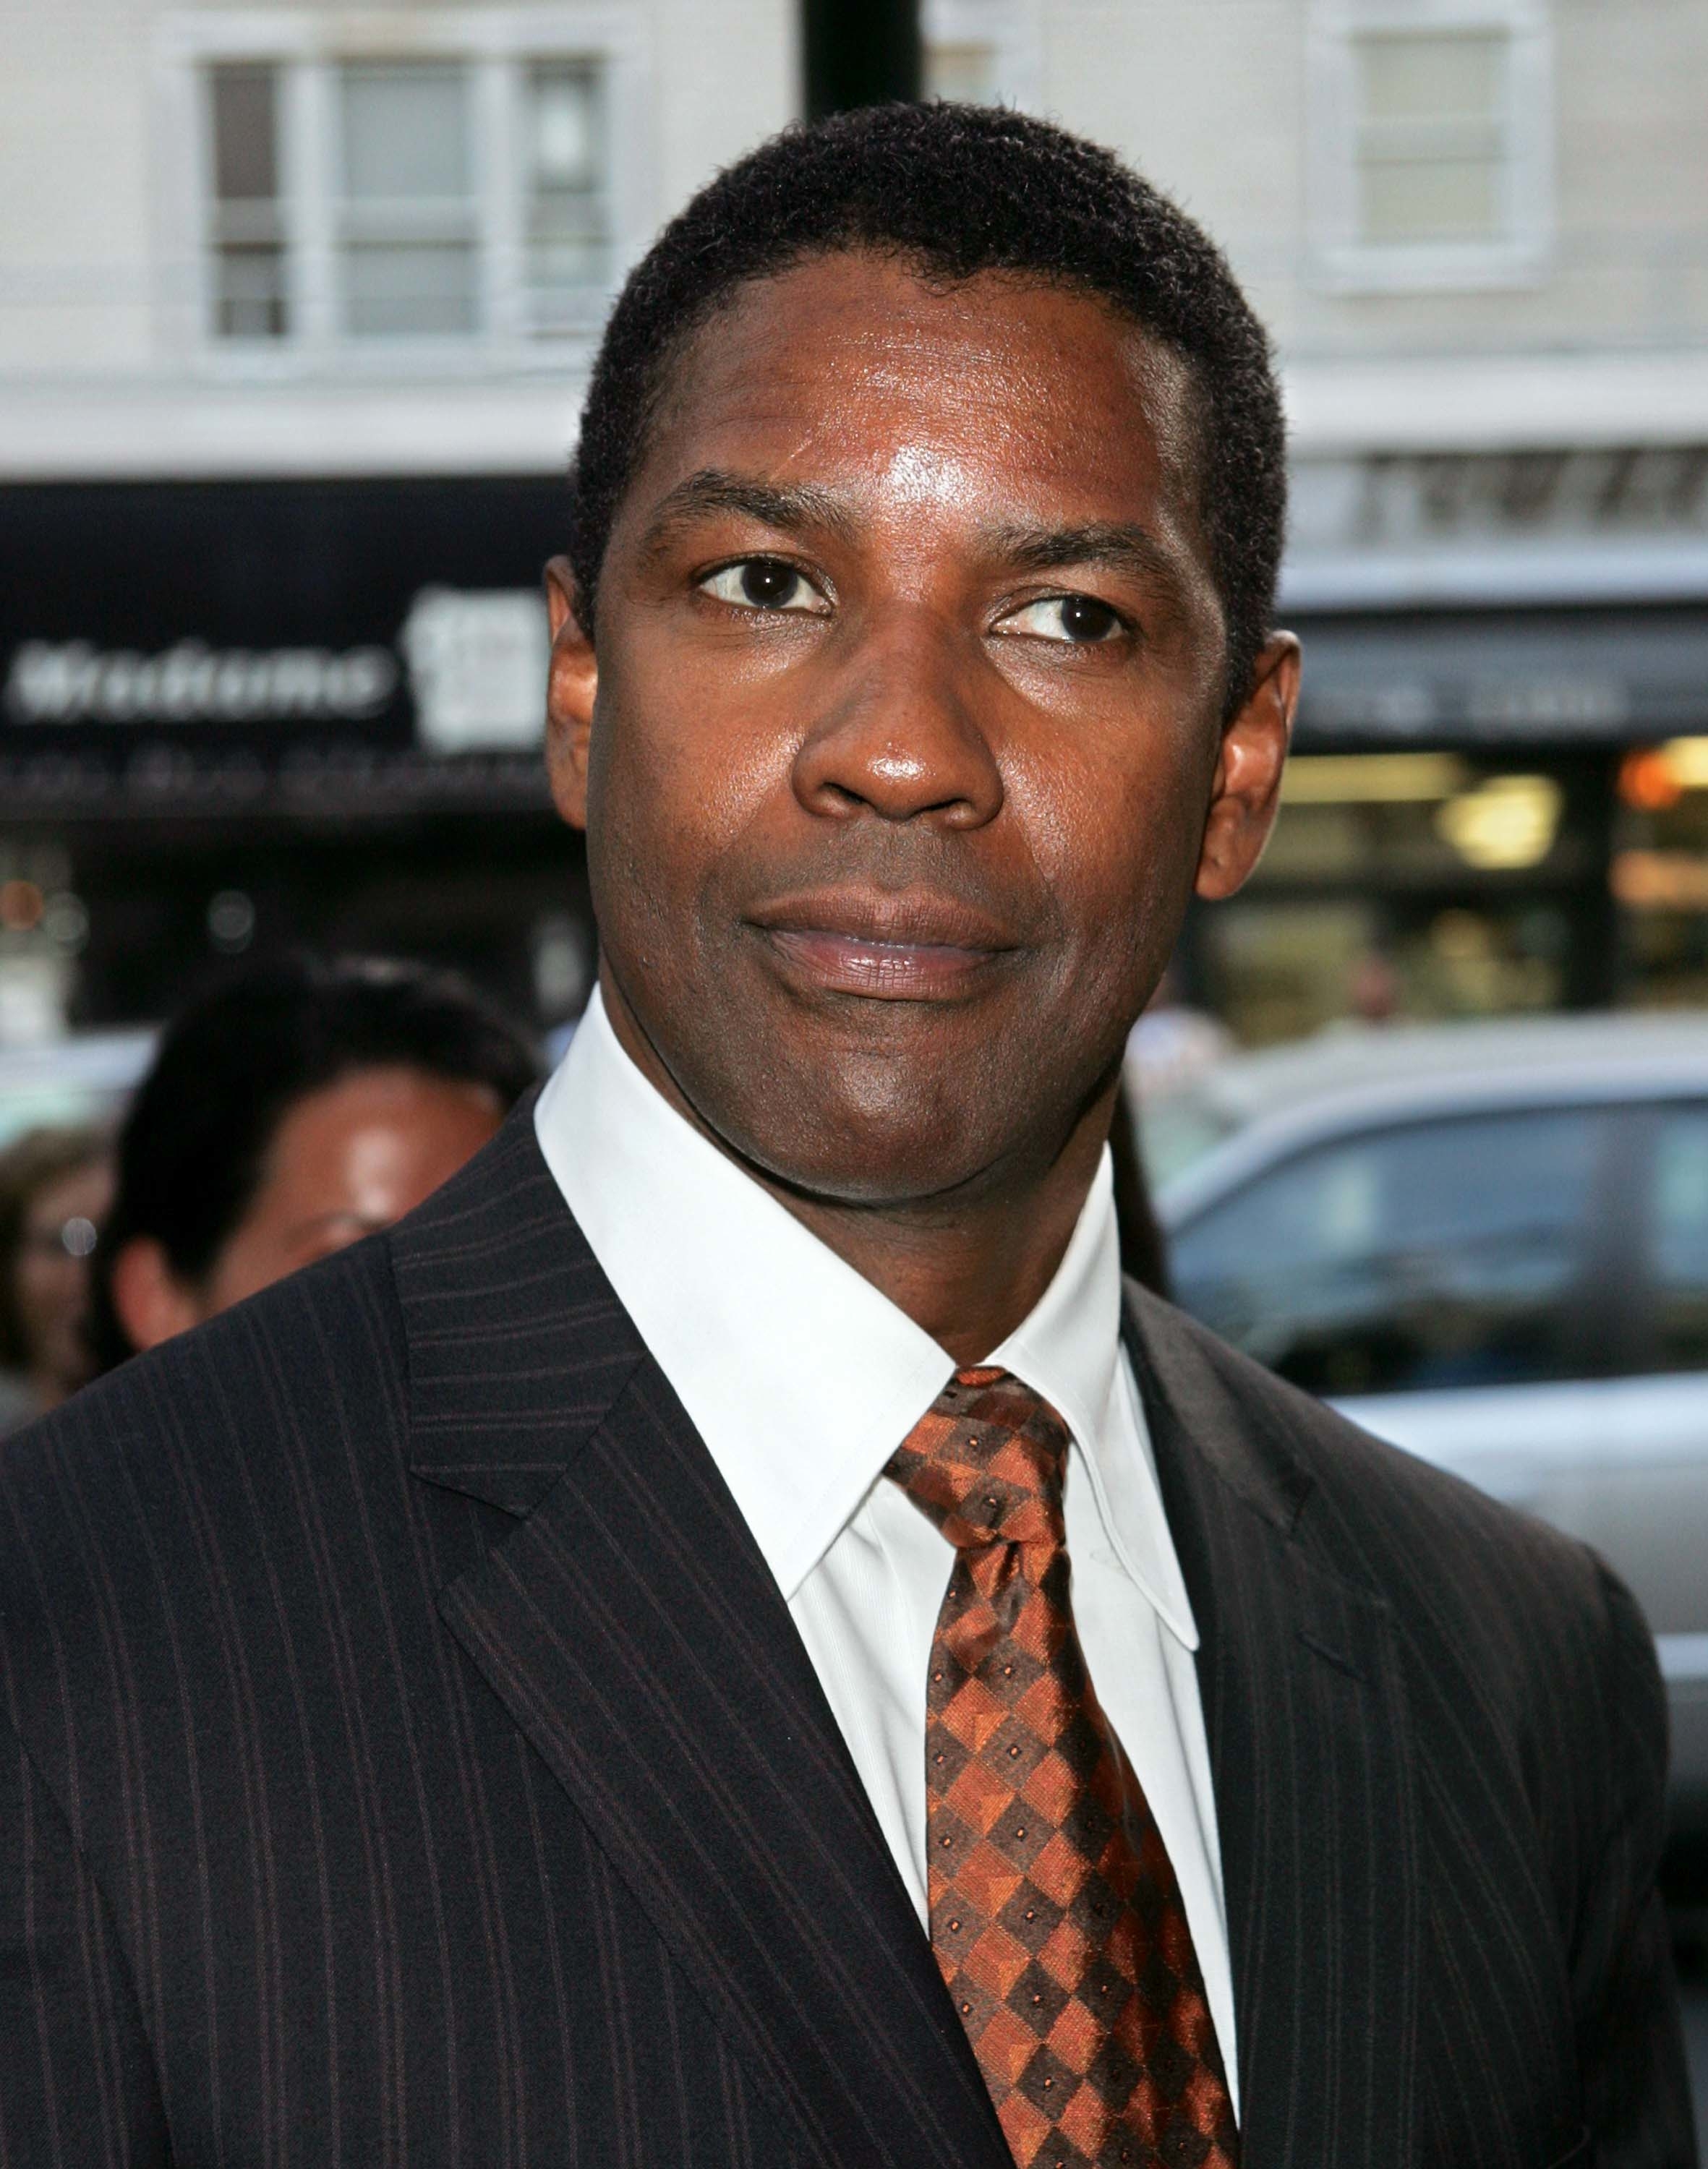 Denzel Washington in a pinstripe suit and patterned tie at an event